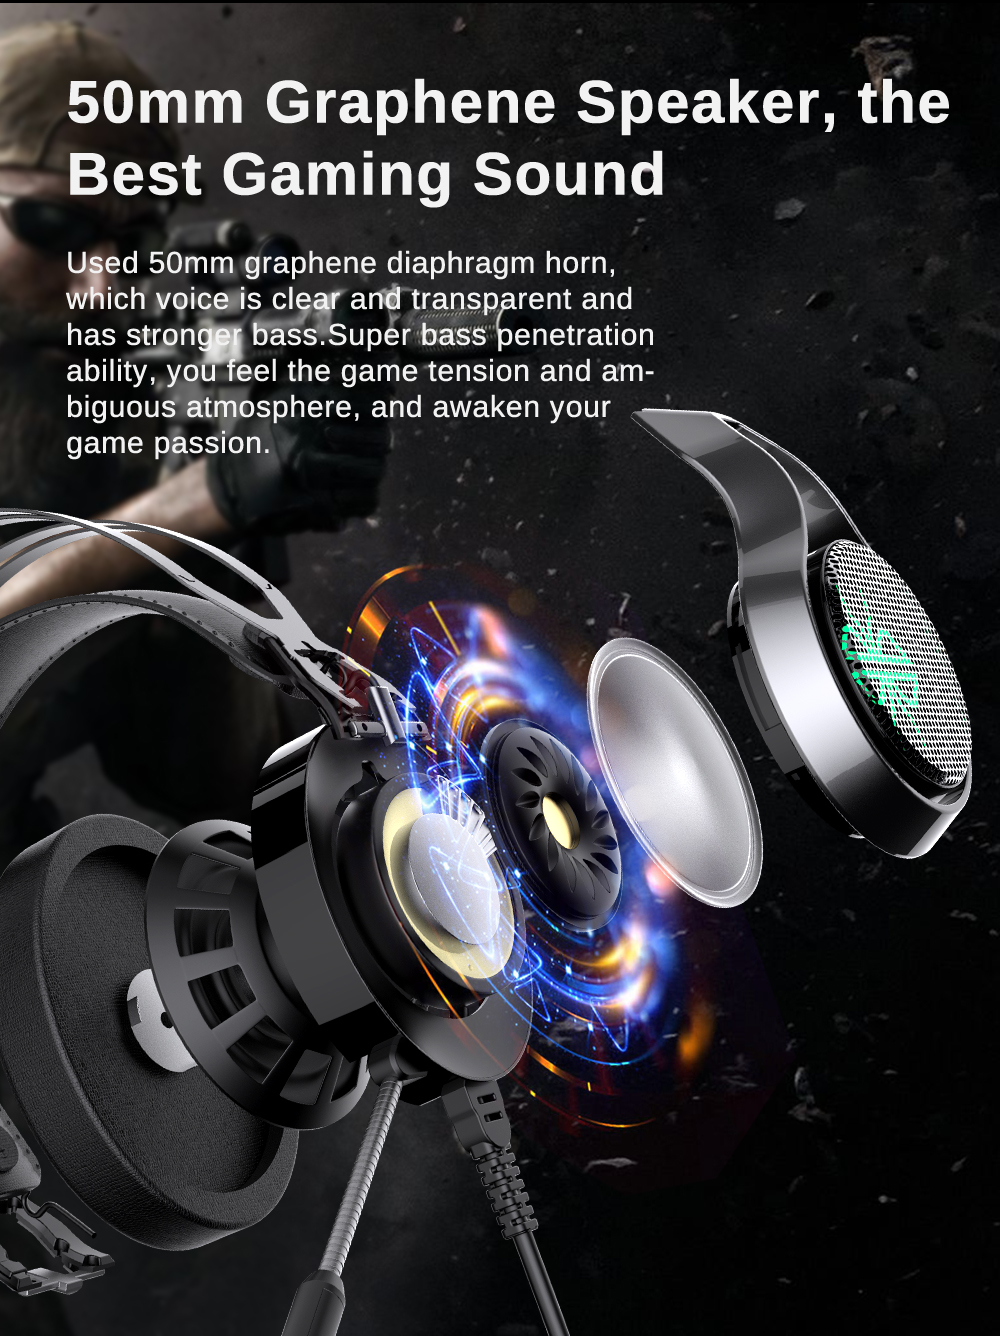 DACOM-GH05-Wired-Gaming-Headphones-USB-71-Stereo-Surround-Sound-ENC-Noise-Reduction-50MM-Driver-Lumi-1789026-4